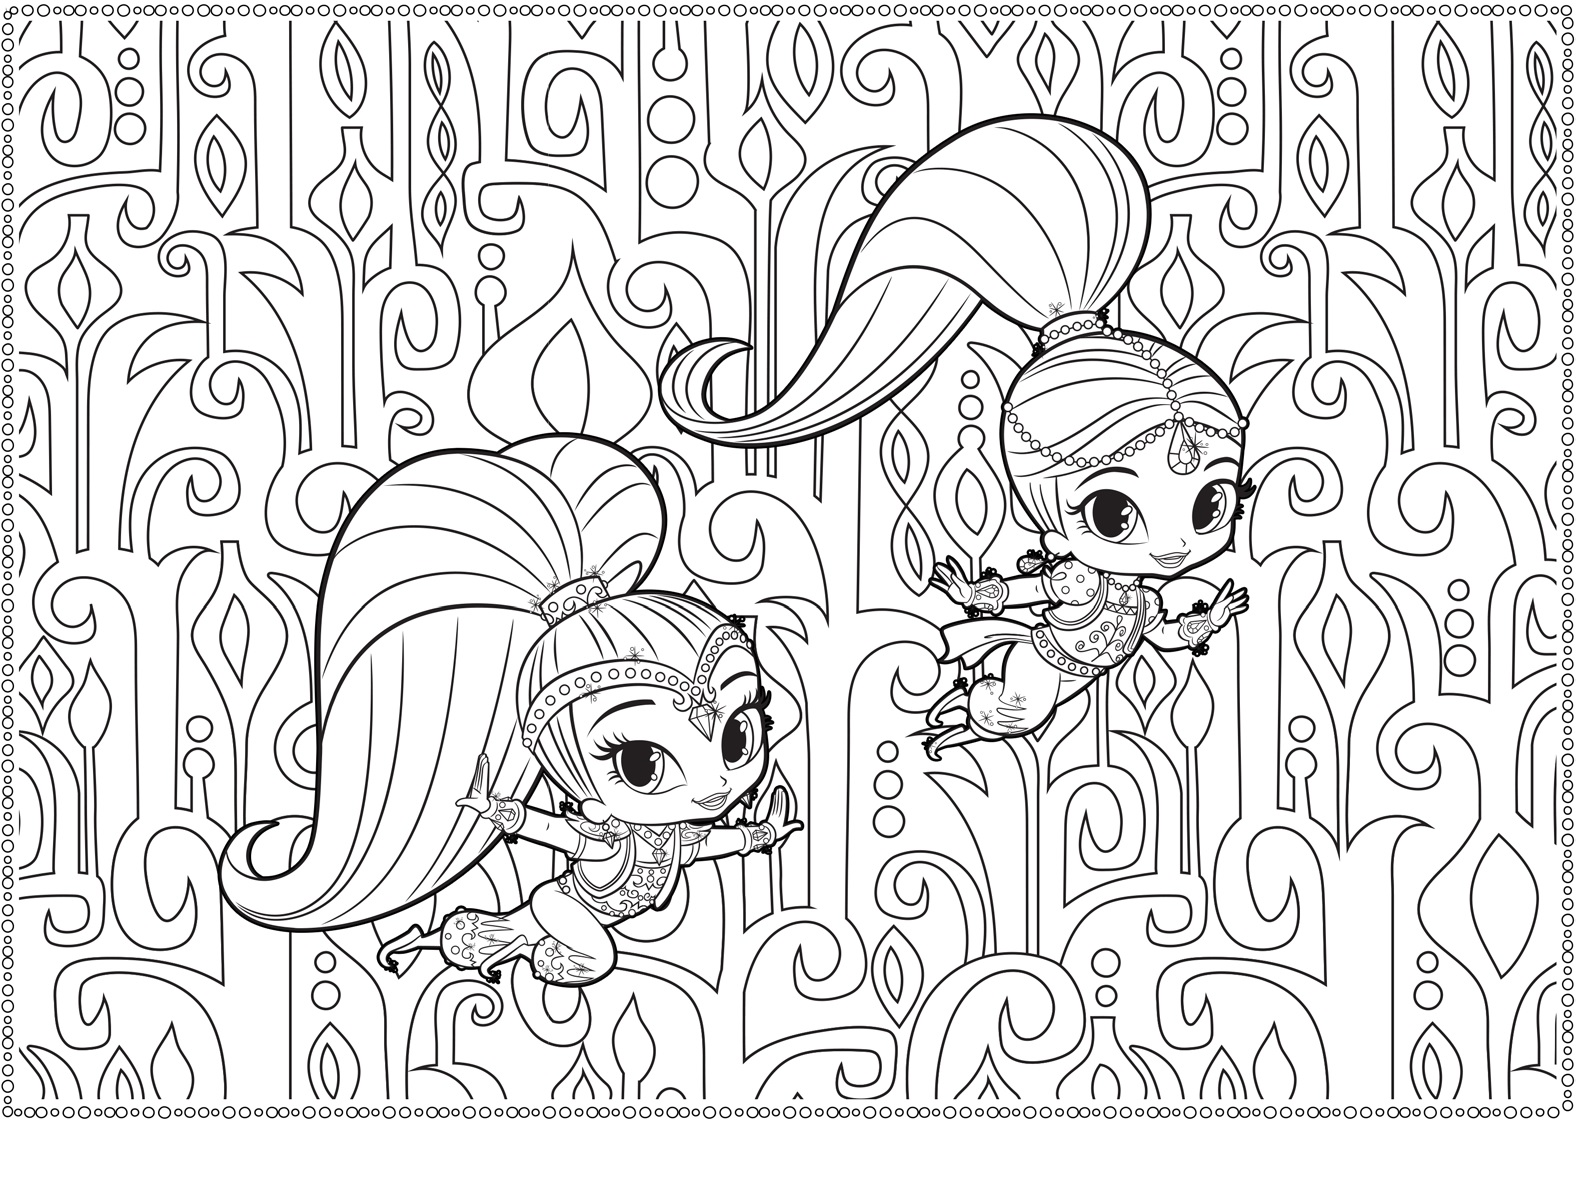 Shimmer-and-Shine-Nick-JR-coloring-sheet-for-adults